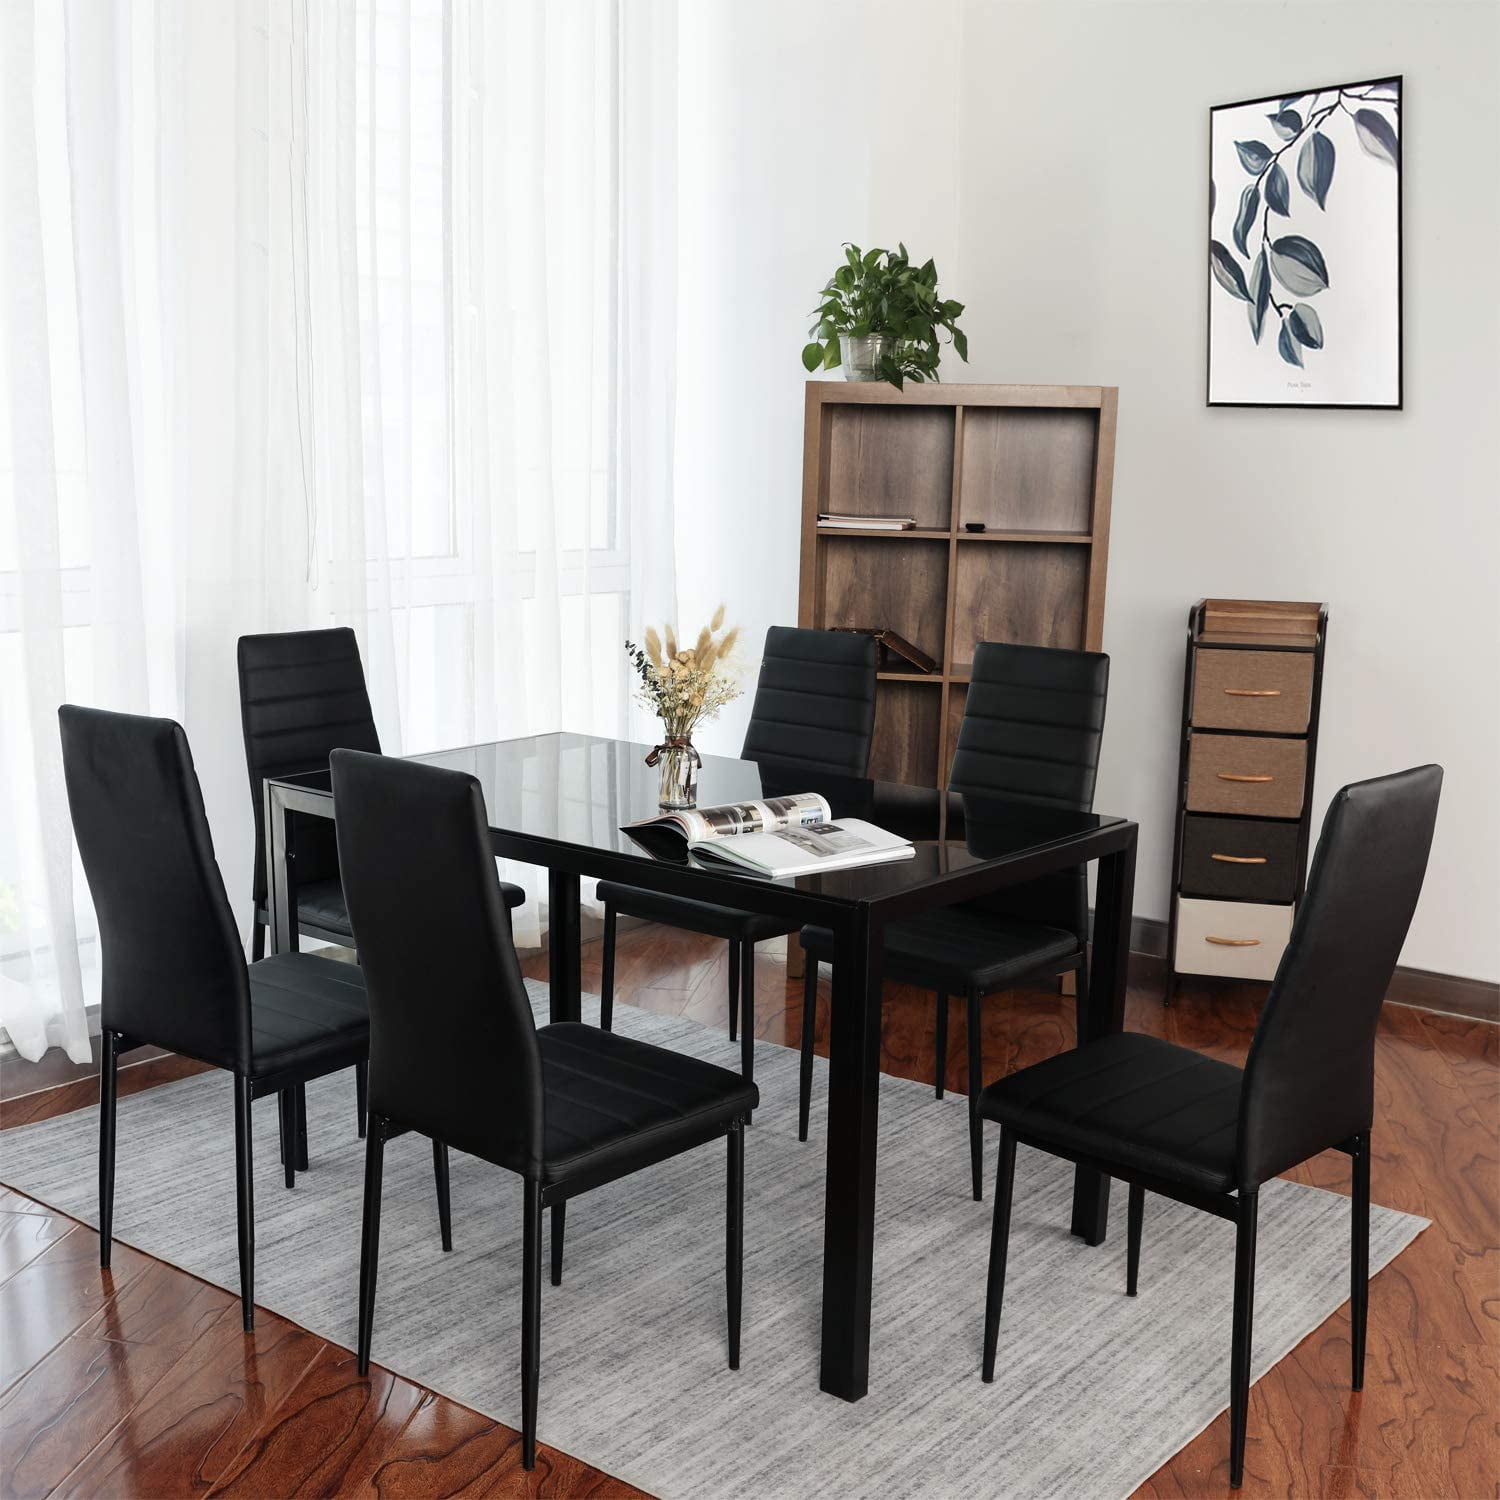 GIZZA Industrial Style Small Dining Room Table Set with 4 Chairs Solid Wood&Metal Kitchen Table Faux Leather Dining Chair Comfortable Sturdy Furniture Chestnut Brown 